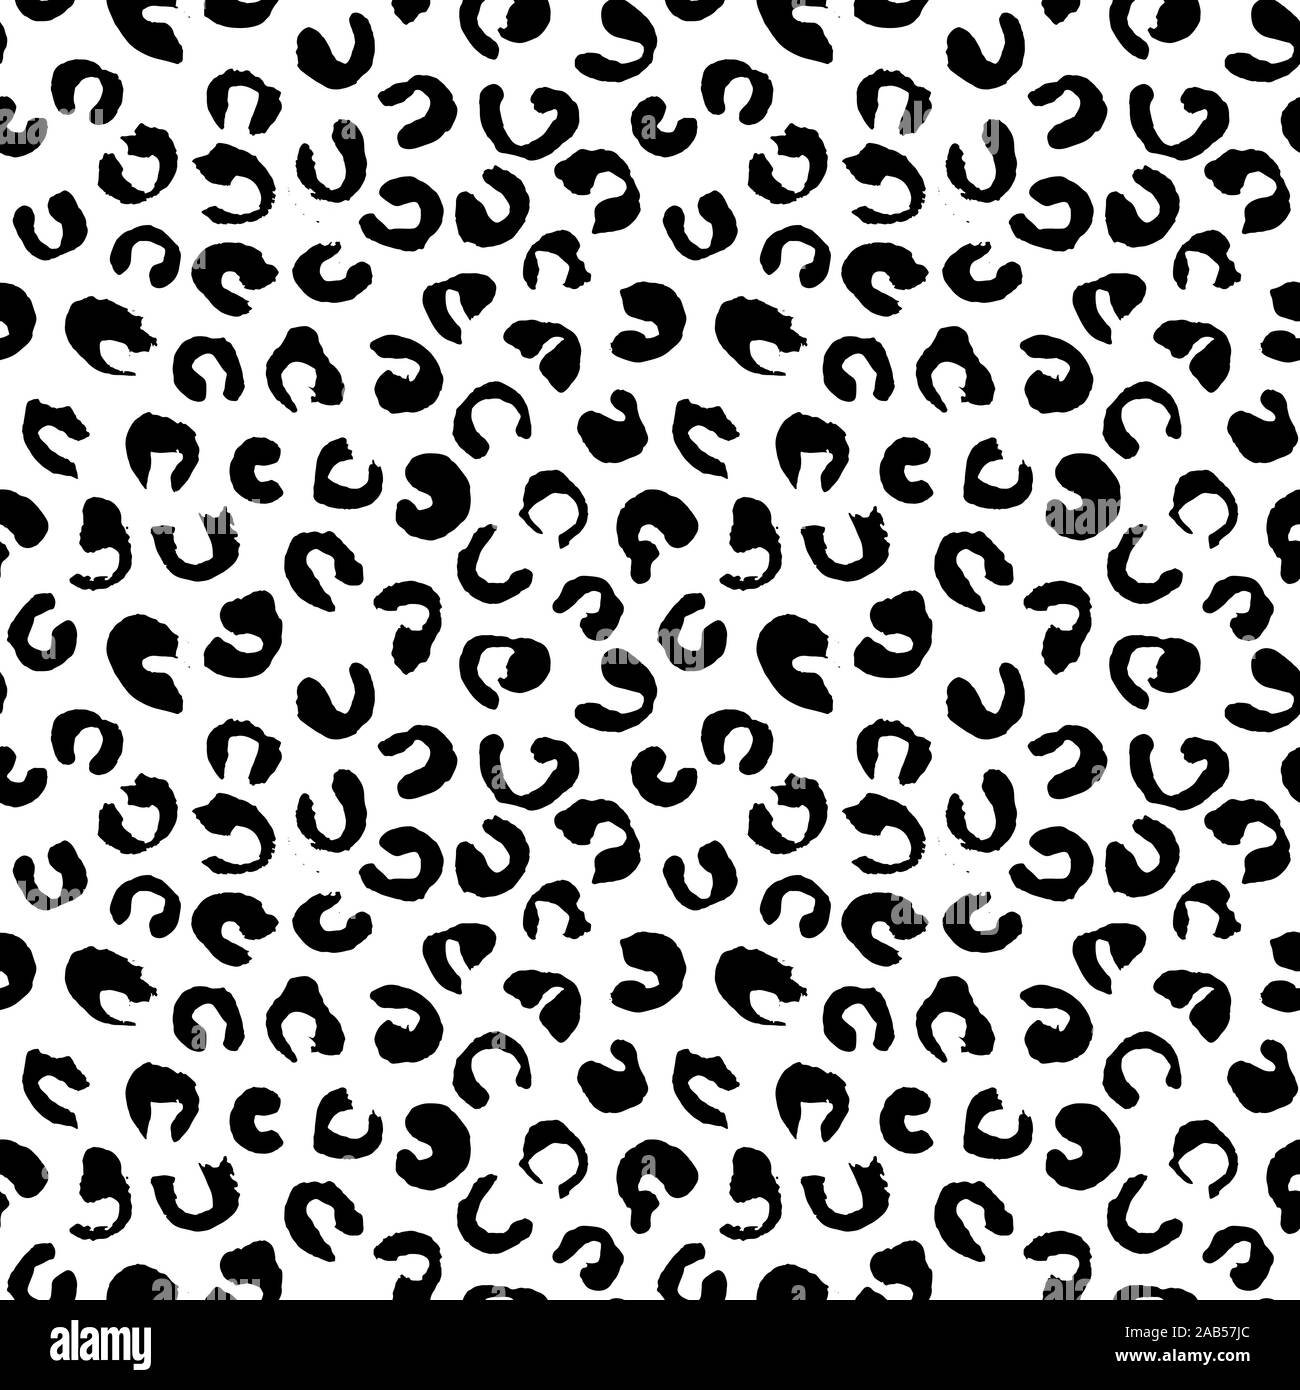 Panther fur pattern Stock Vector Images - Alamy